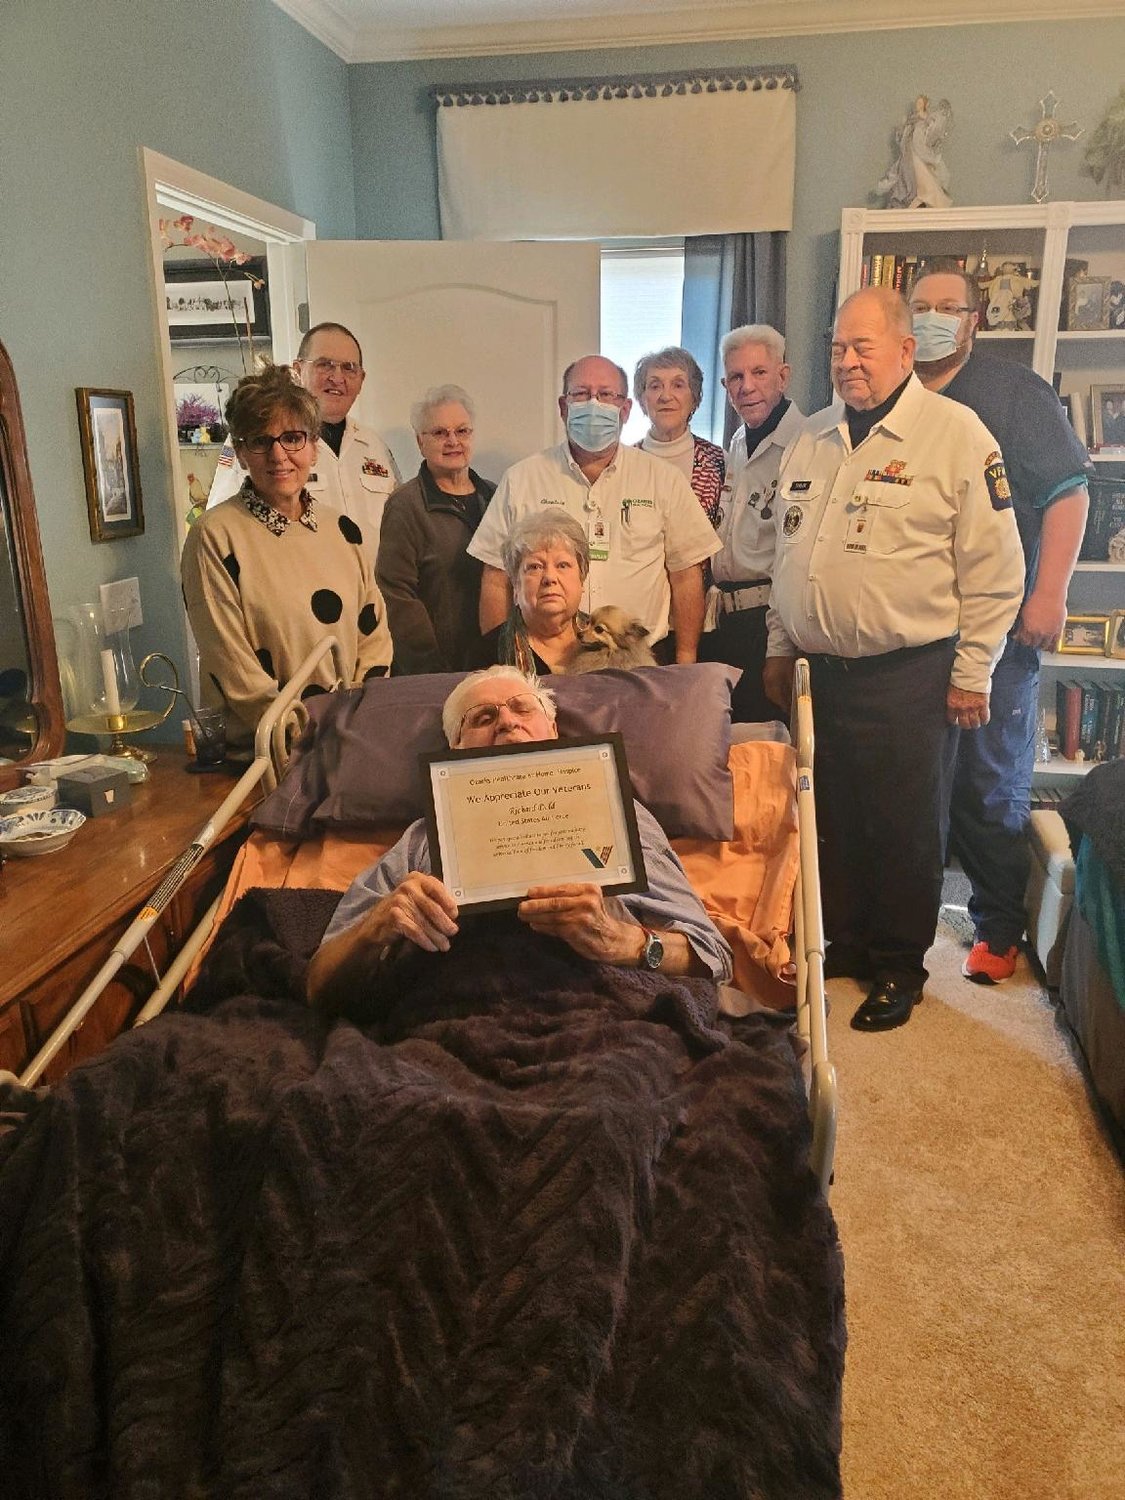 Ozarks Healthcare At Home: Hospice recently honored Richard “Dick” Dold of West Plains for his military service with a “We Honor Veterans” ceremony.